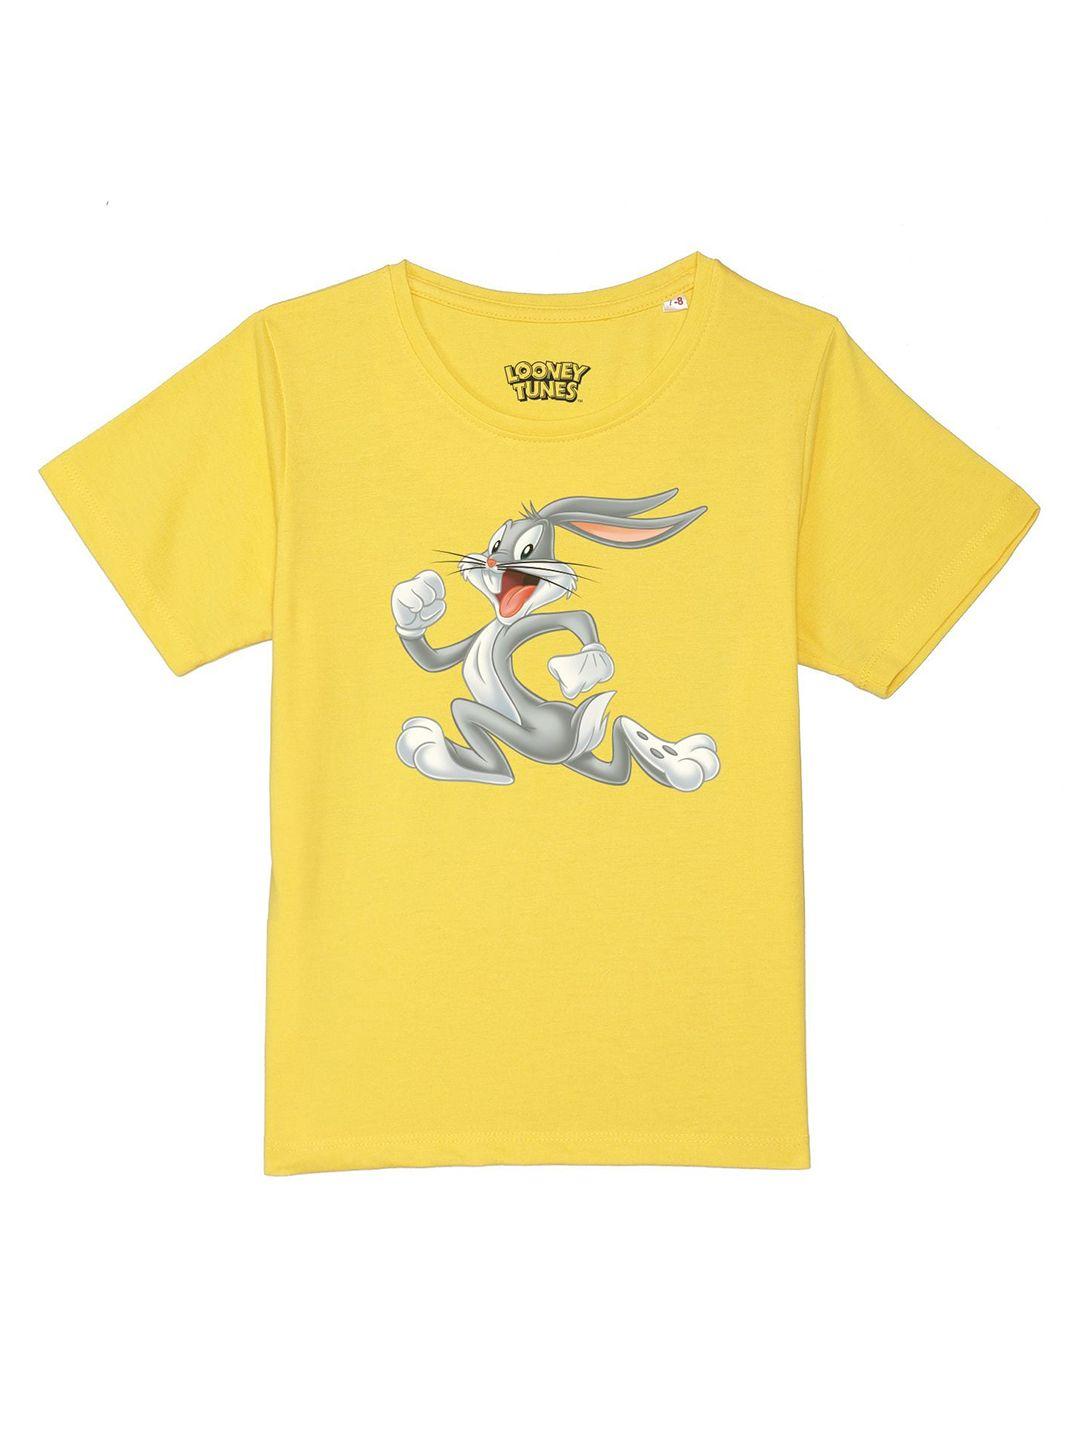 looney tunes by wear your mind boys yellow cotton printed t-shirt